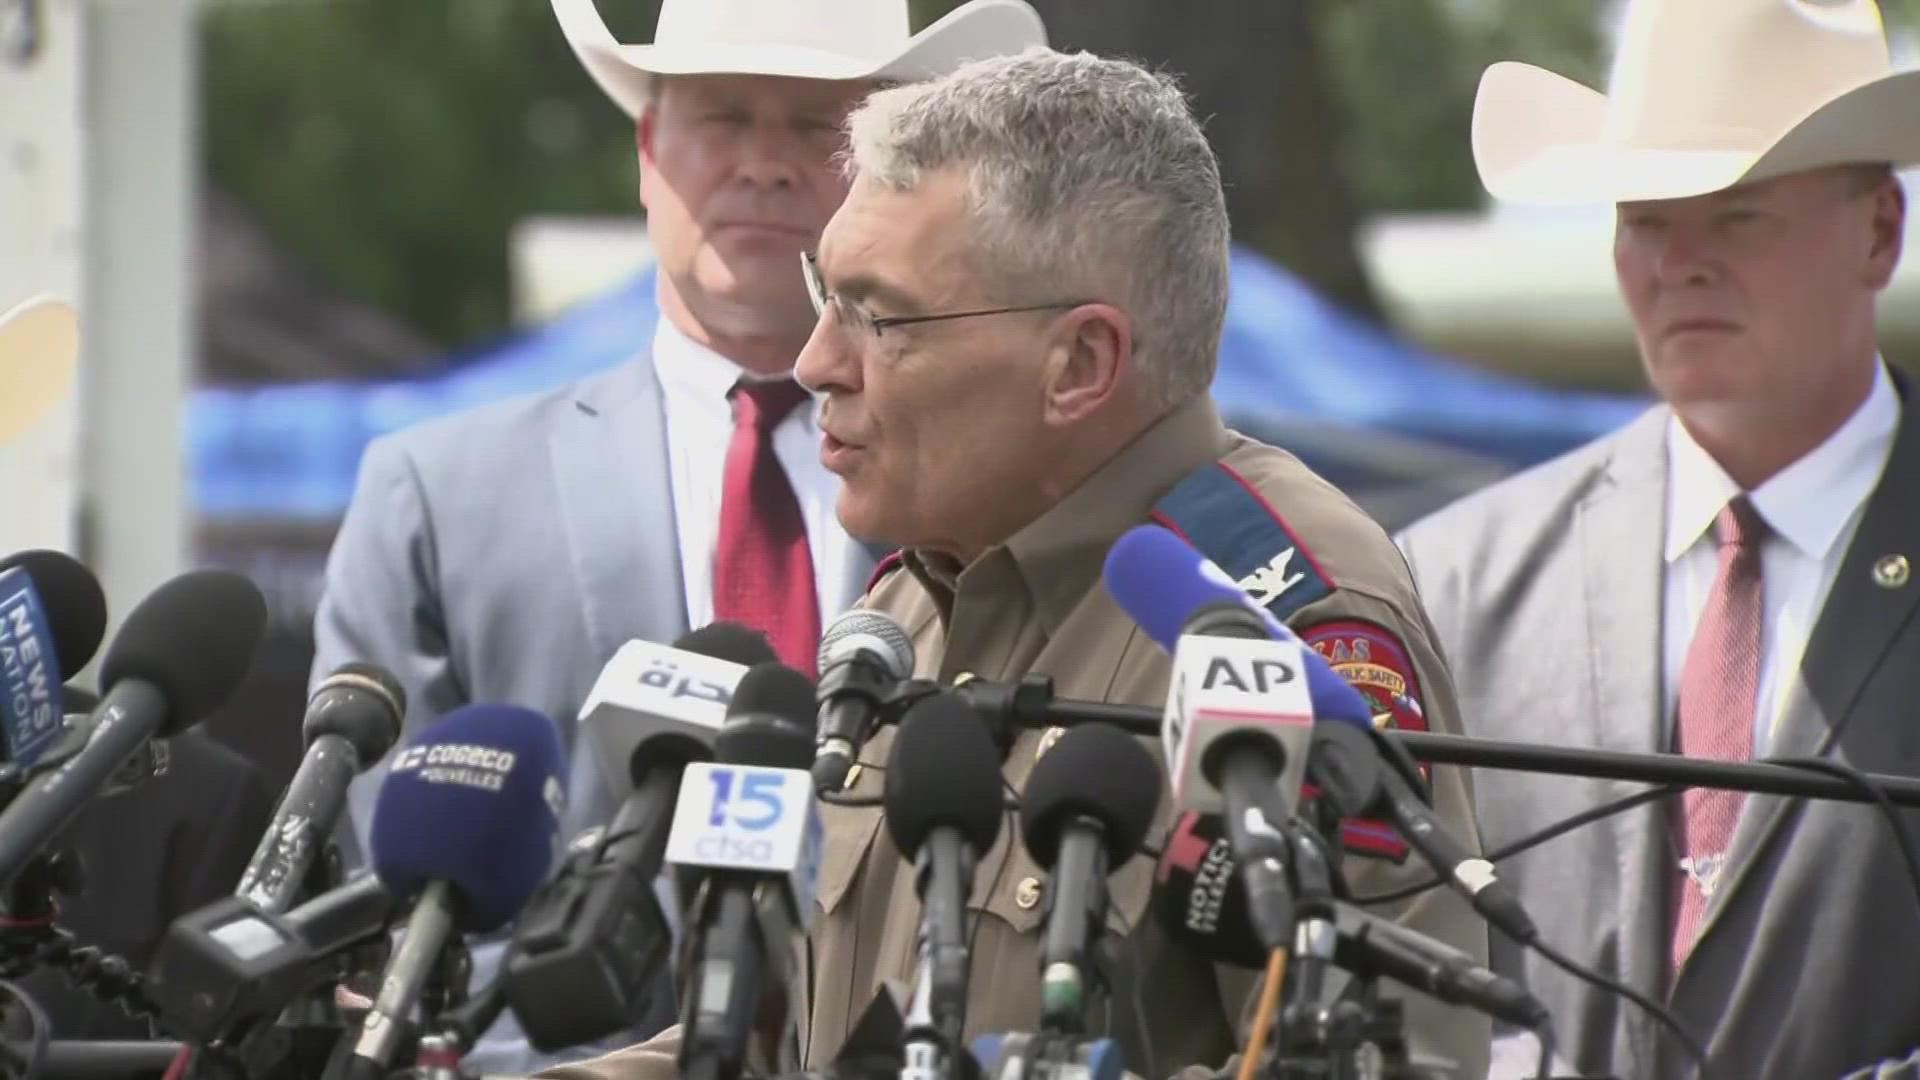 DPS explains decision behind officers waiting outside hallway instead of immediately entering.